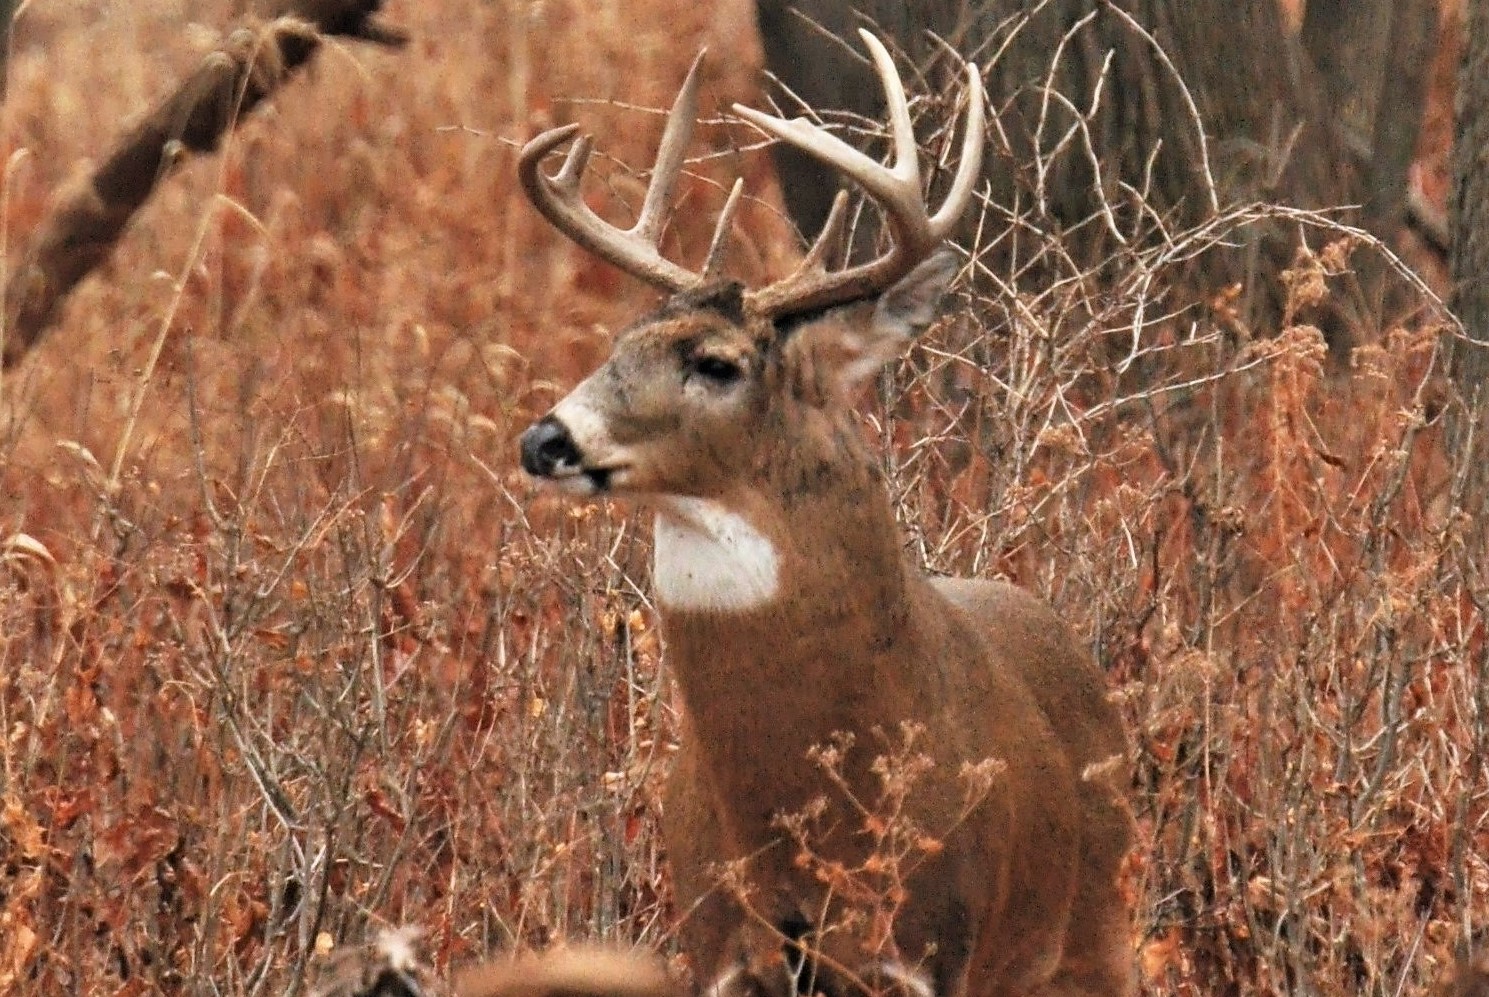 Do Bucks Blow: Will They Blow at You?